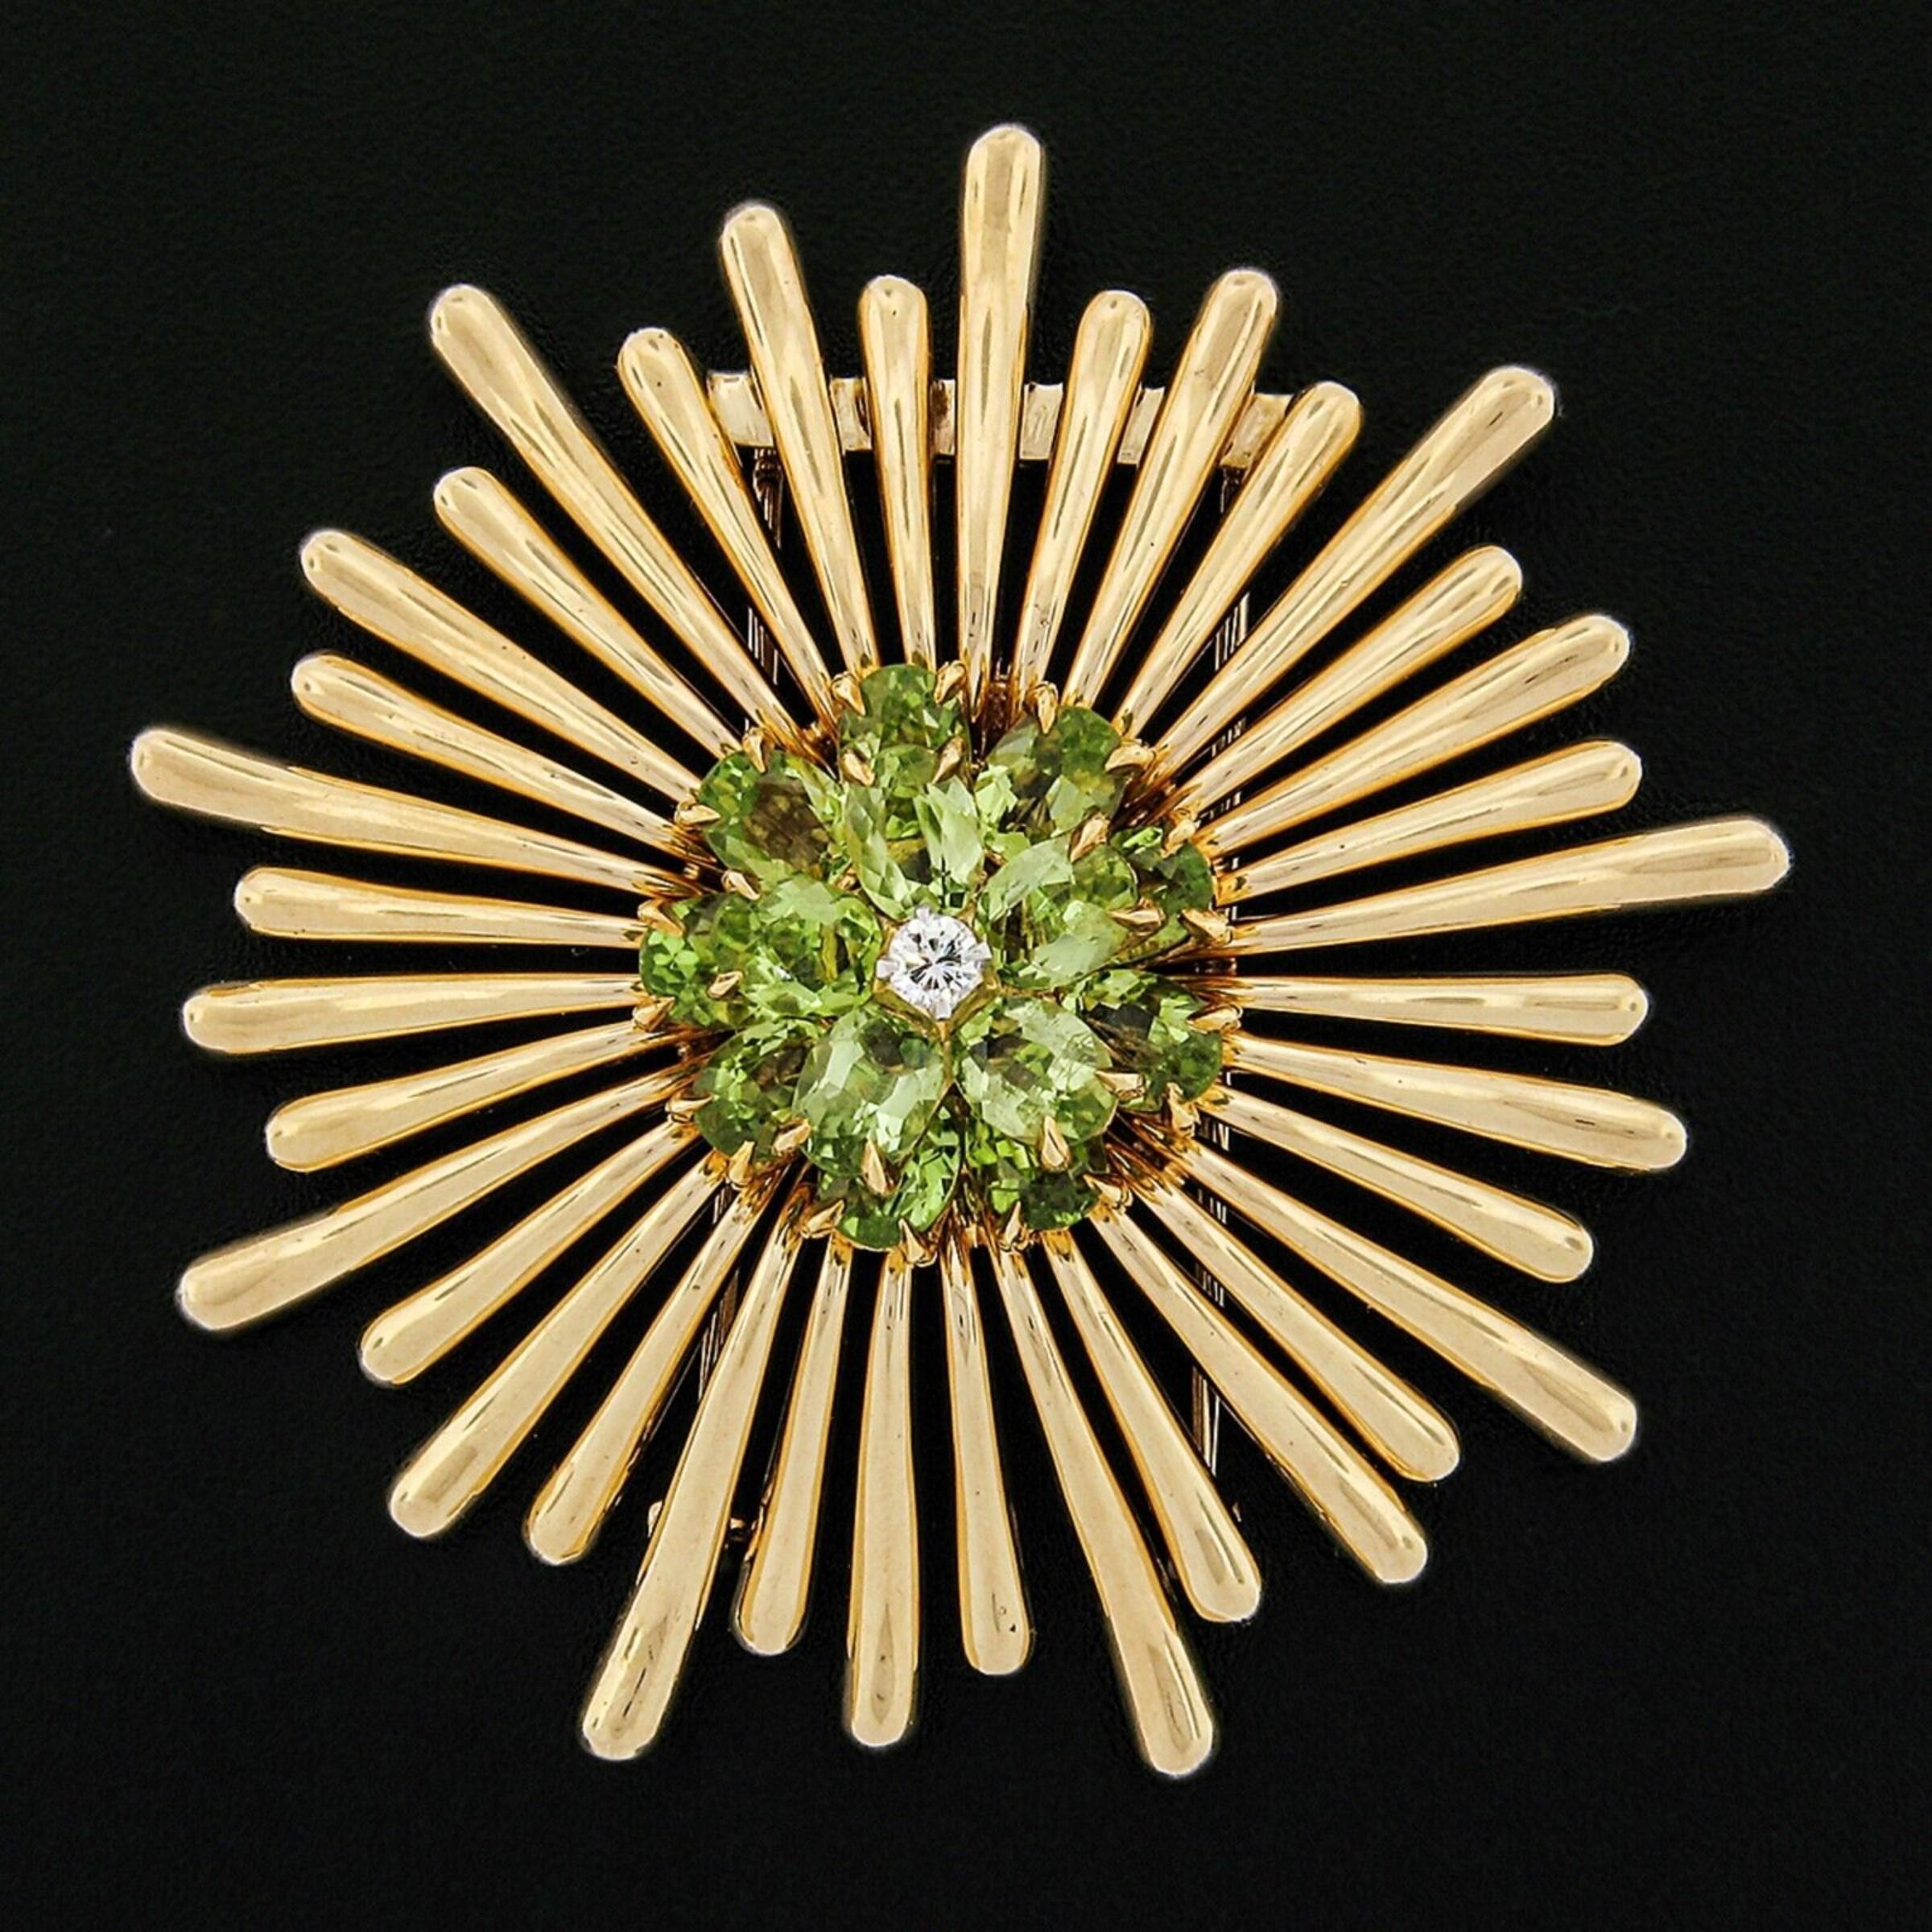 This large, breathtaking retro brooch is crafted in solid 14k rosy yellow gold and features a truly outstanding spray design which is set with approximately 9.5 carats of oval brilliant cut genuine peridot stones. The stones display very fine and